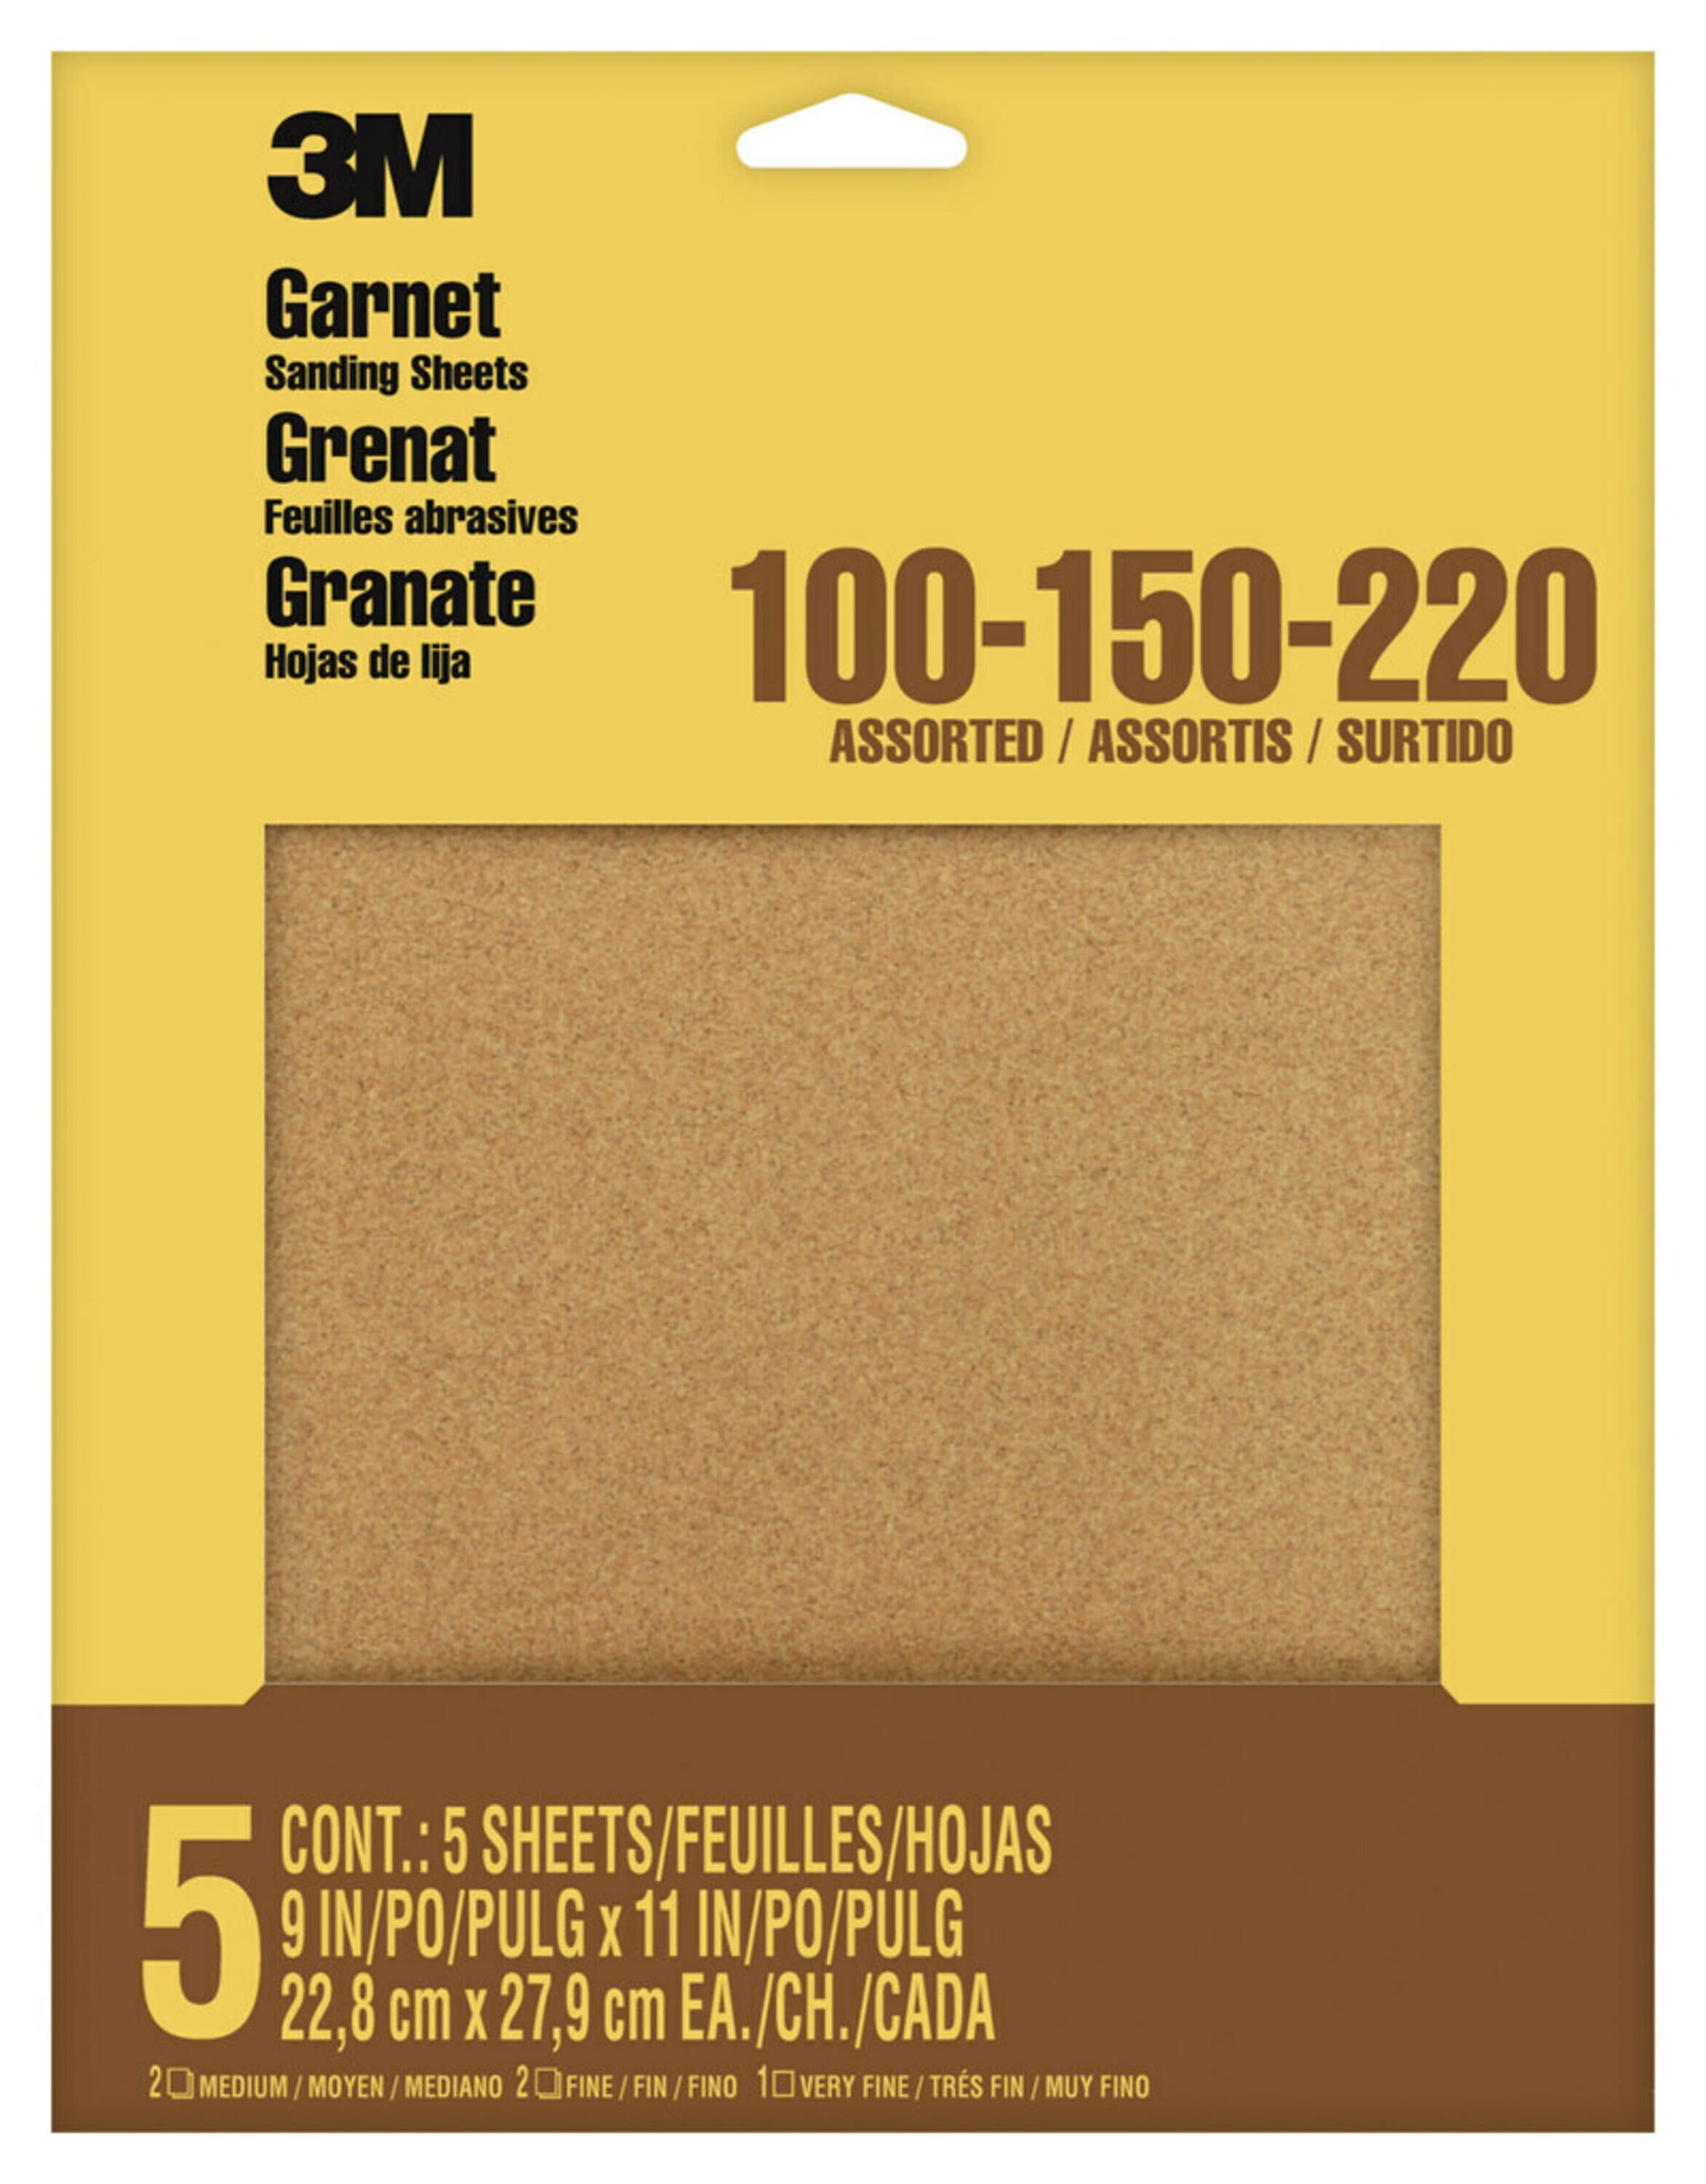 3M Garnet Sandpaper, 9 in. x 11 in., Assorted Grits, 5 Pack - image 1 of 2